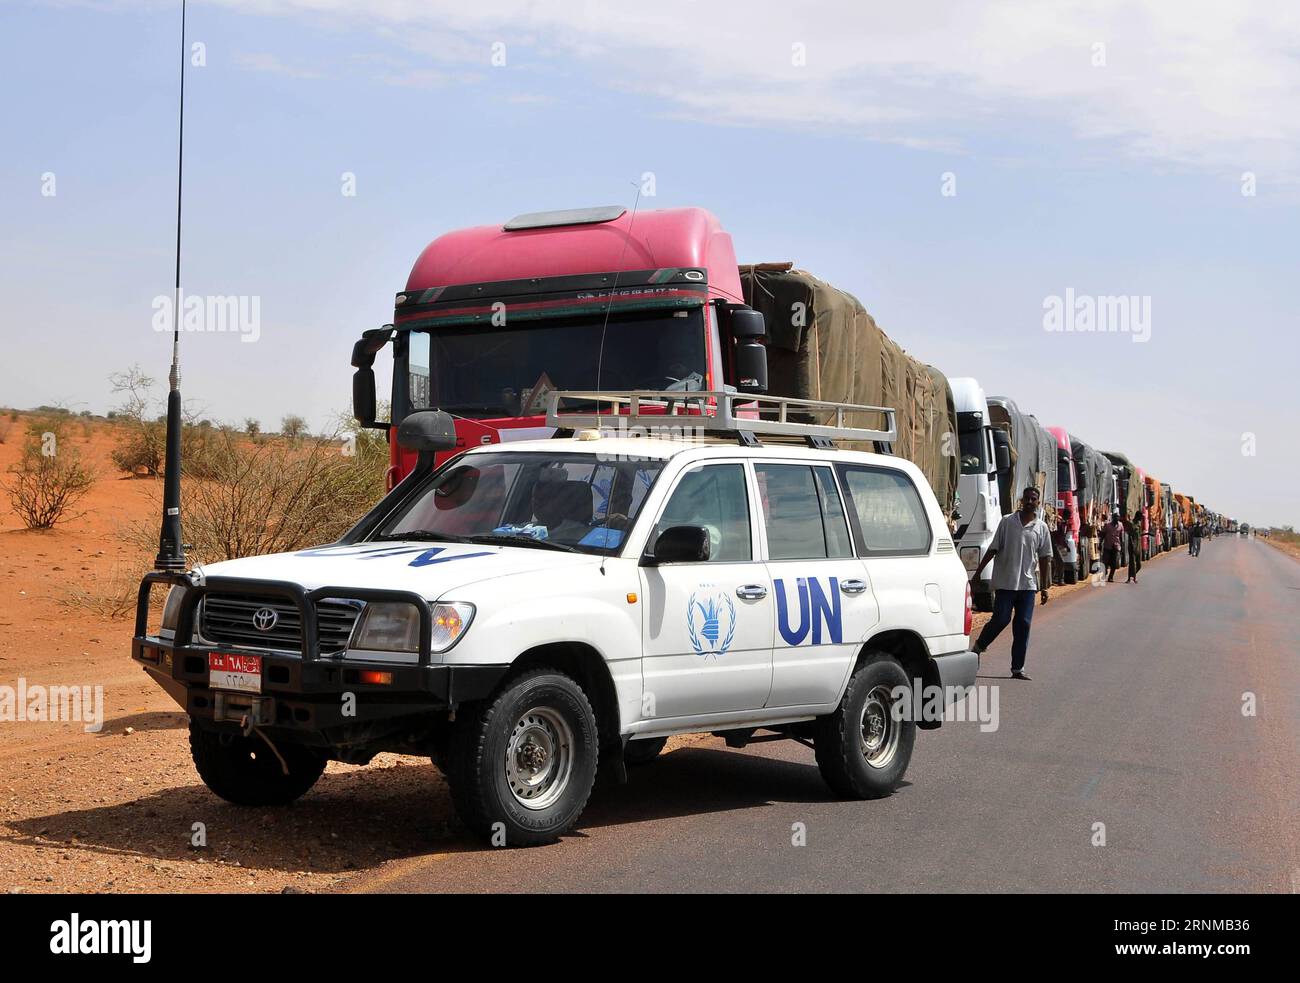 (170520) -- KHARTOUM, May 20, 2017 -- Convoys carrying food materials are seen through the humanitarian corridor from Sudan s El Obied to Bentiu in Bahr el Ghazal State of South Soudan, May 19, 2017. The humanitarian corridors recently opened by Sudan government have contributed to the delivery of humanitarian aid to South Sudanese citizens and to lessening the famine there, according to aid organizations. ) (gj) SUDAN-HUMANITARIAN CORRIDORS-SOUTH SUDAN MohamedxBabiker PUBLICATIONxNOTxINxCHN   Khartoum May 20 2017 convoys carrying Food Material are Lakes Through The Humanitarian Corridor from Stock Photo